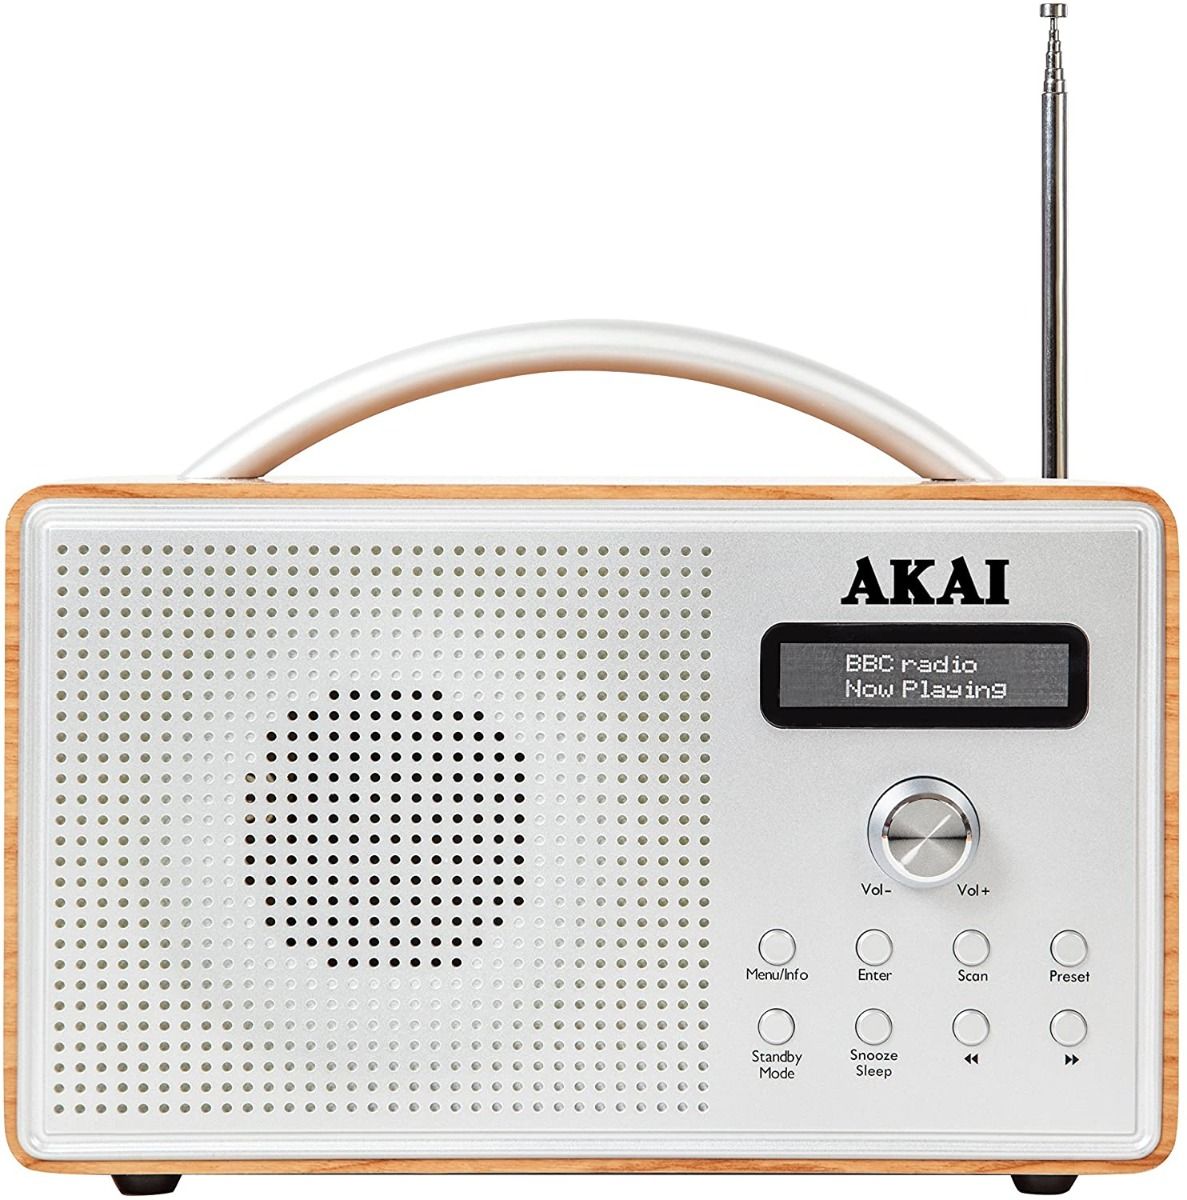 Akai A61018 Portable DAB Radio With LCD Screen| Crystal Clear Speaker - Brown Wood